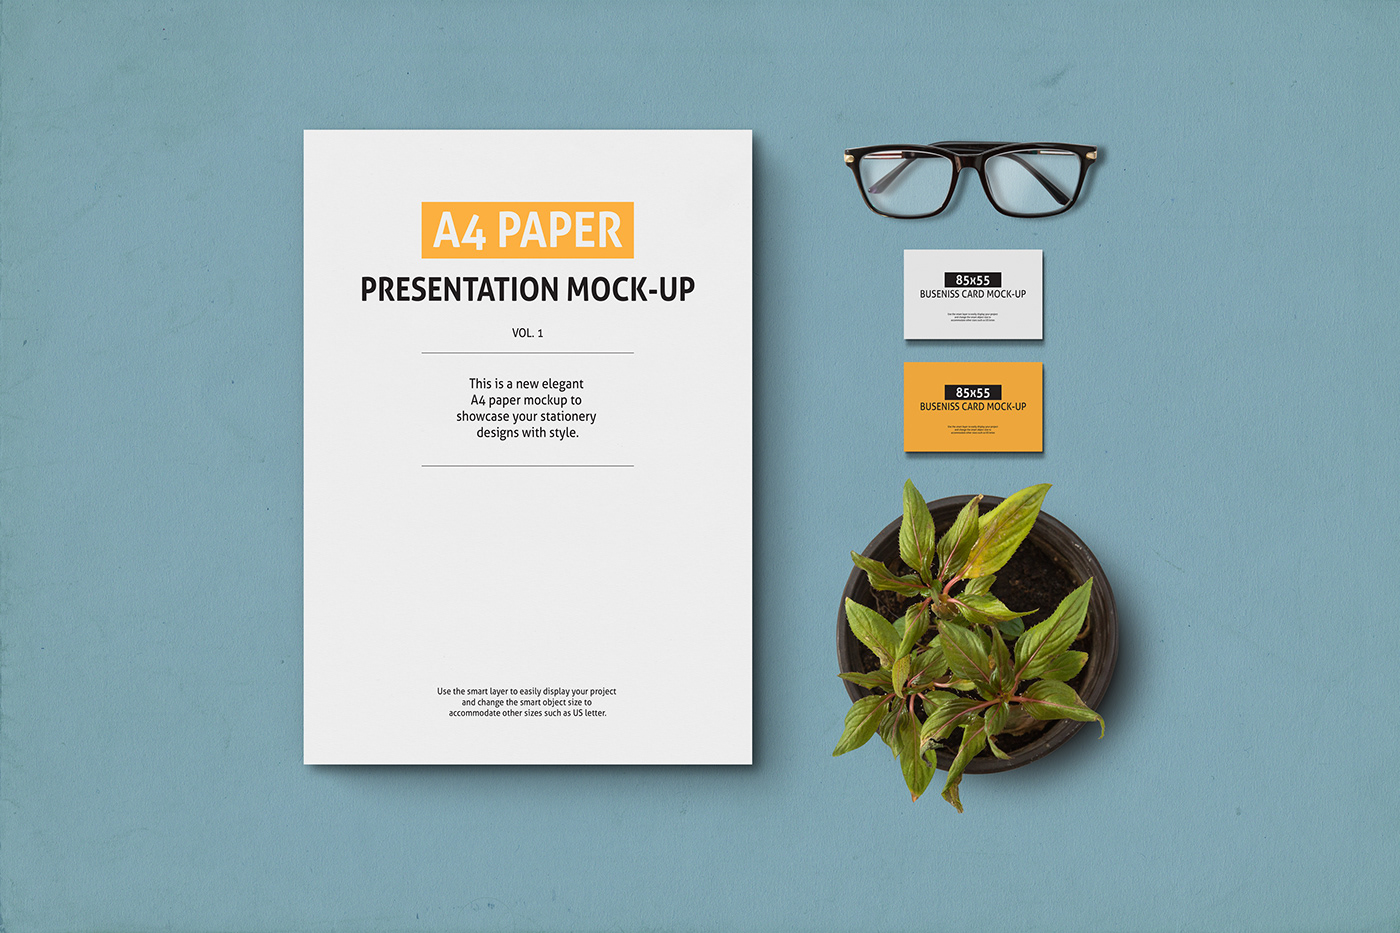 Download FREE FLYER MOCKUP TEMPLATE | FREE PSD | FREE MOCKUP on Behance